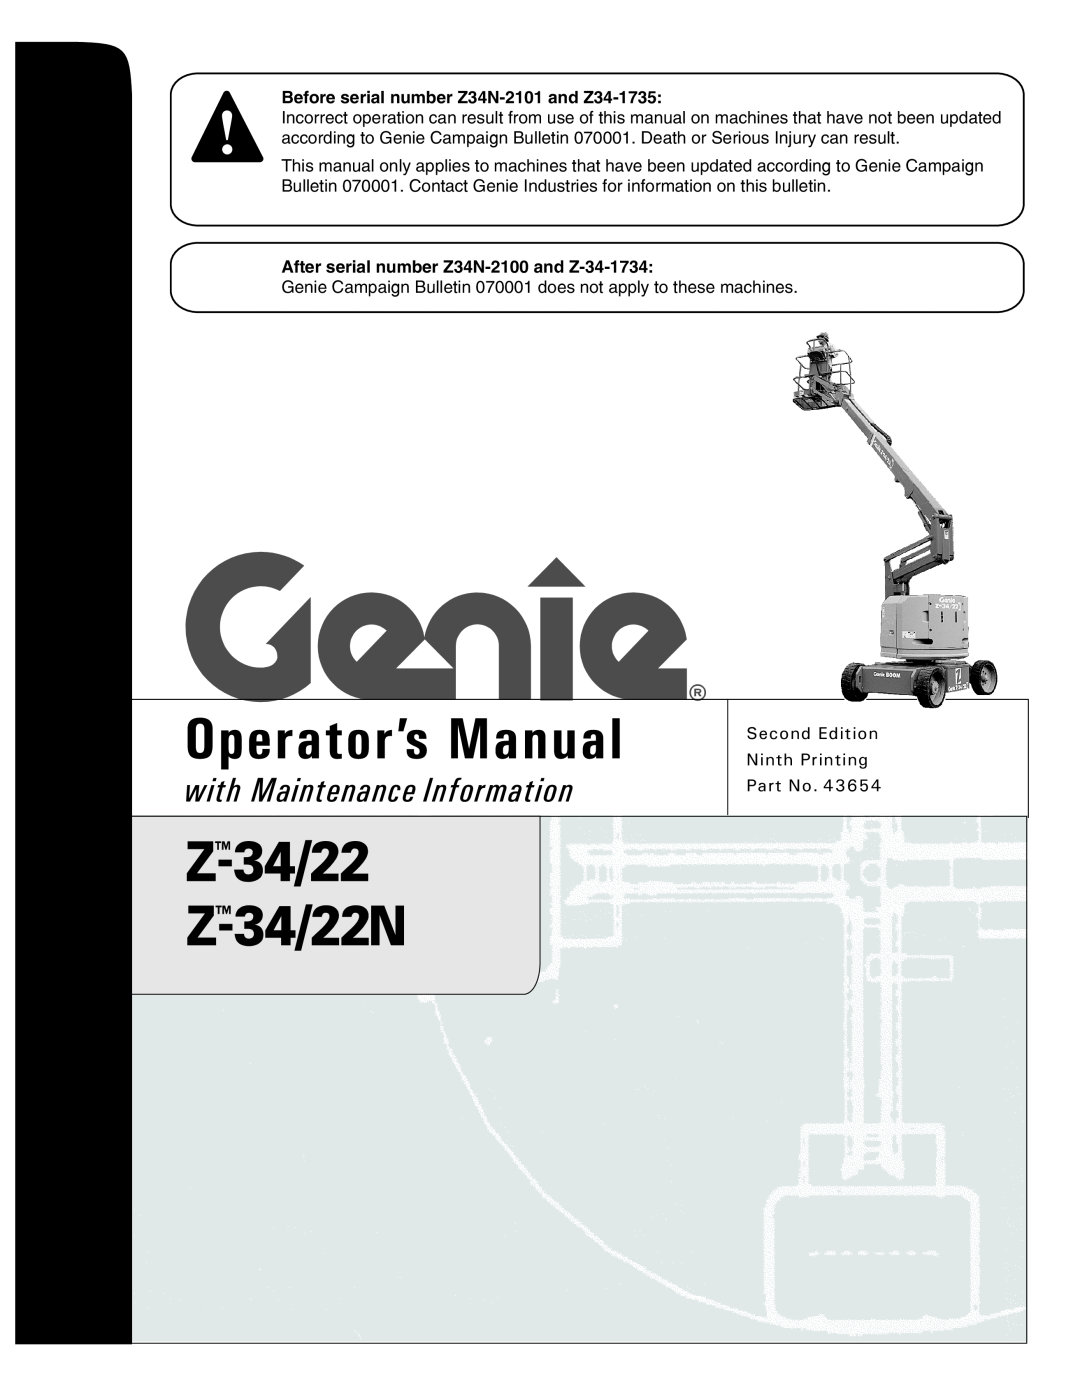 Genie Z-34, Z-22N manual Operator’s Manual, with Maintenance Information, Before serial number Z34N-2101 and Z34-1735 